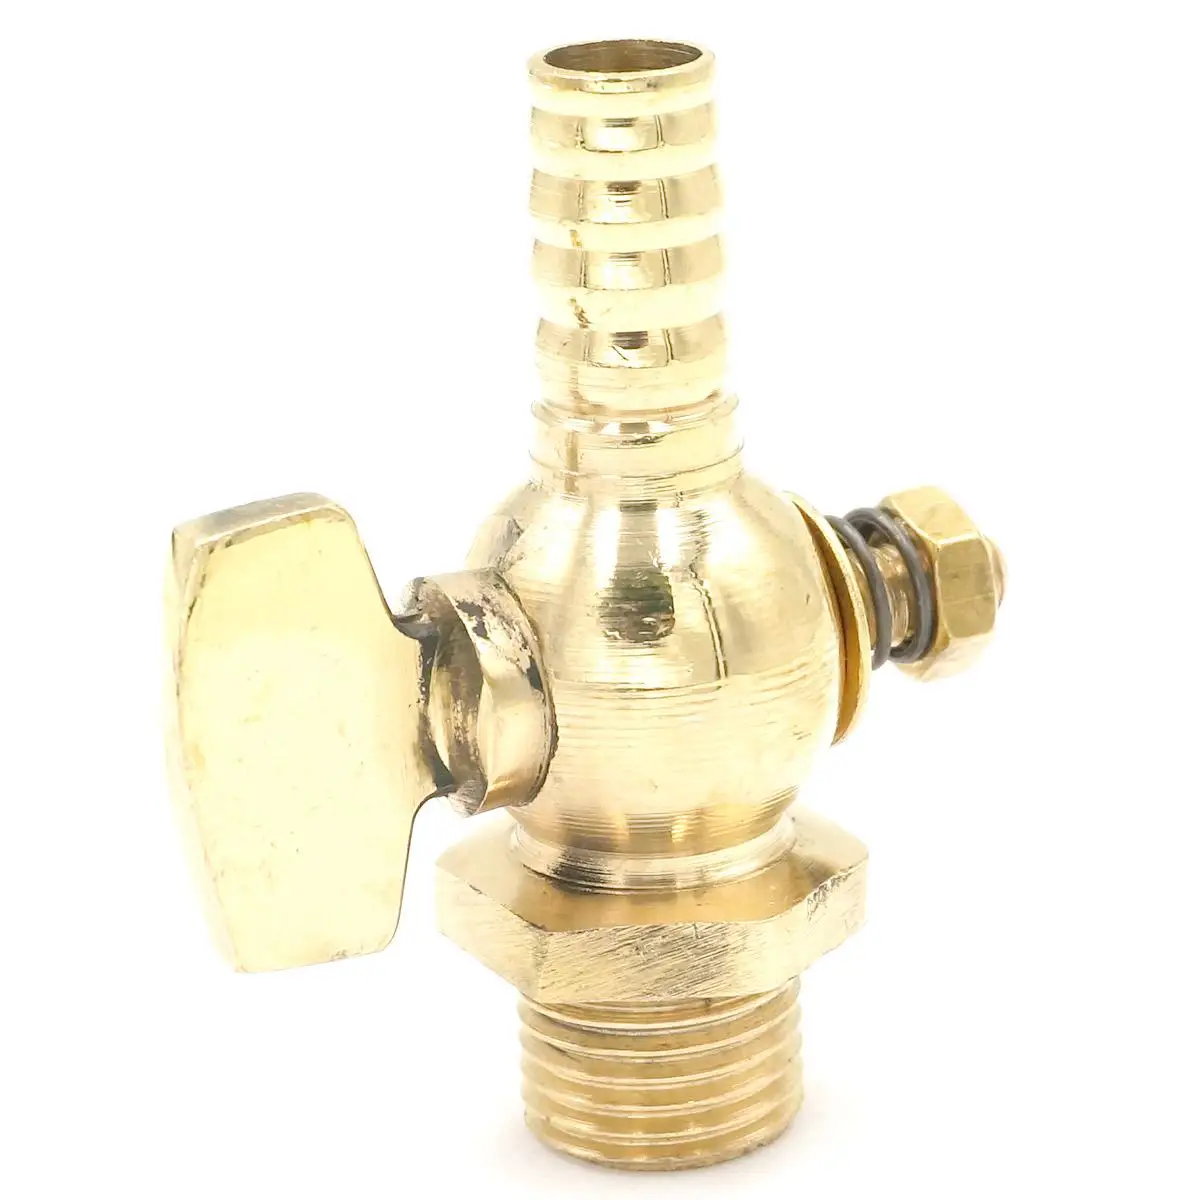 Brass Ball Valve 1/2" BSP Male Fit for 4/6mm ID/OD Hose 0.8 Mpa Air Gas water 